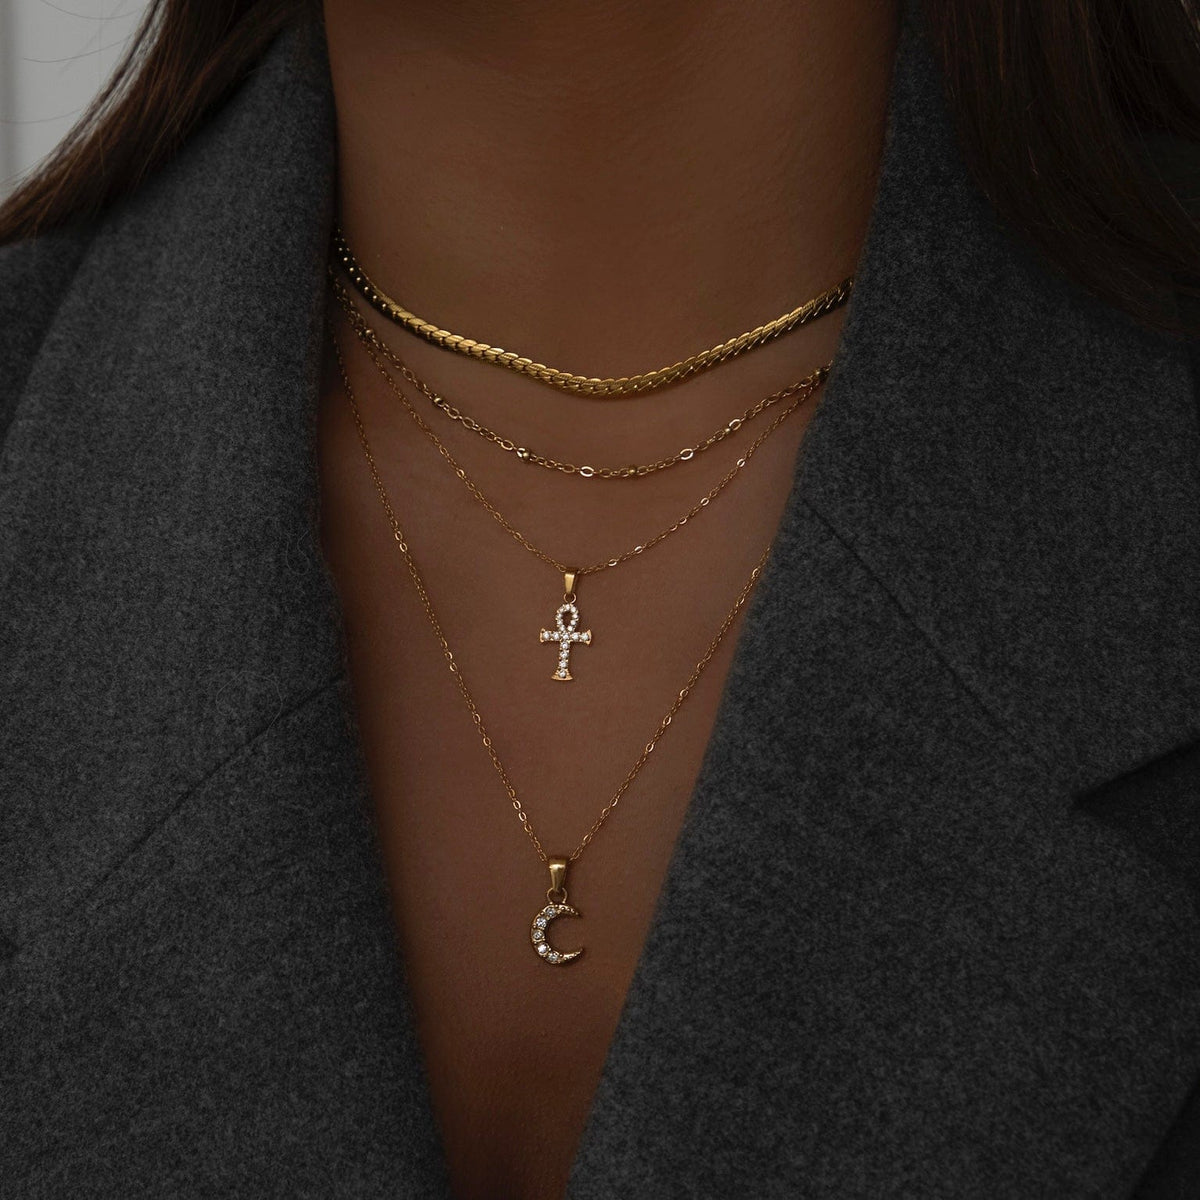 BohoMoon Stainless Steel Ankh Necklace Gold